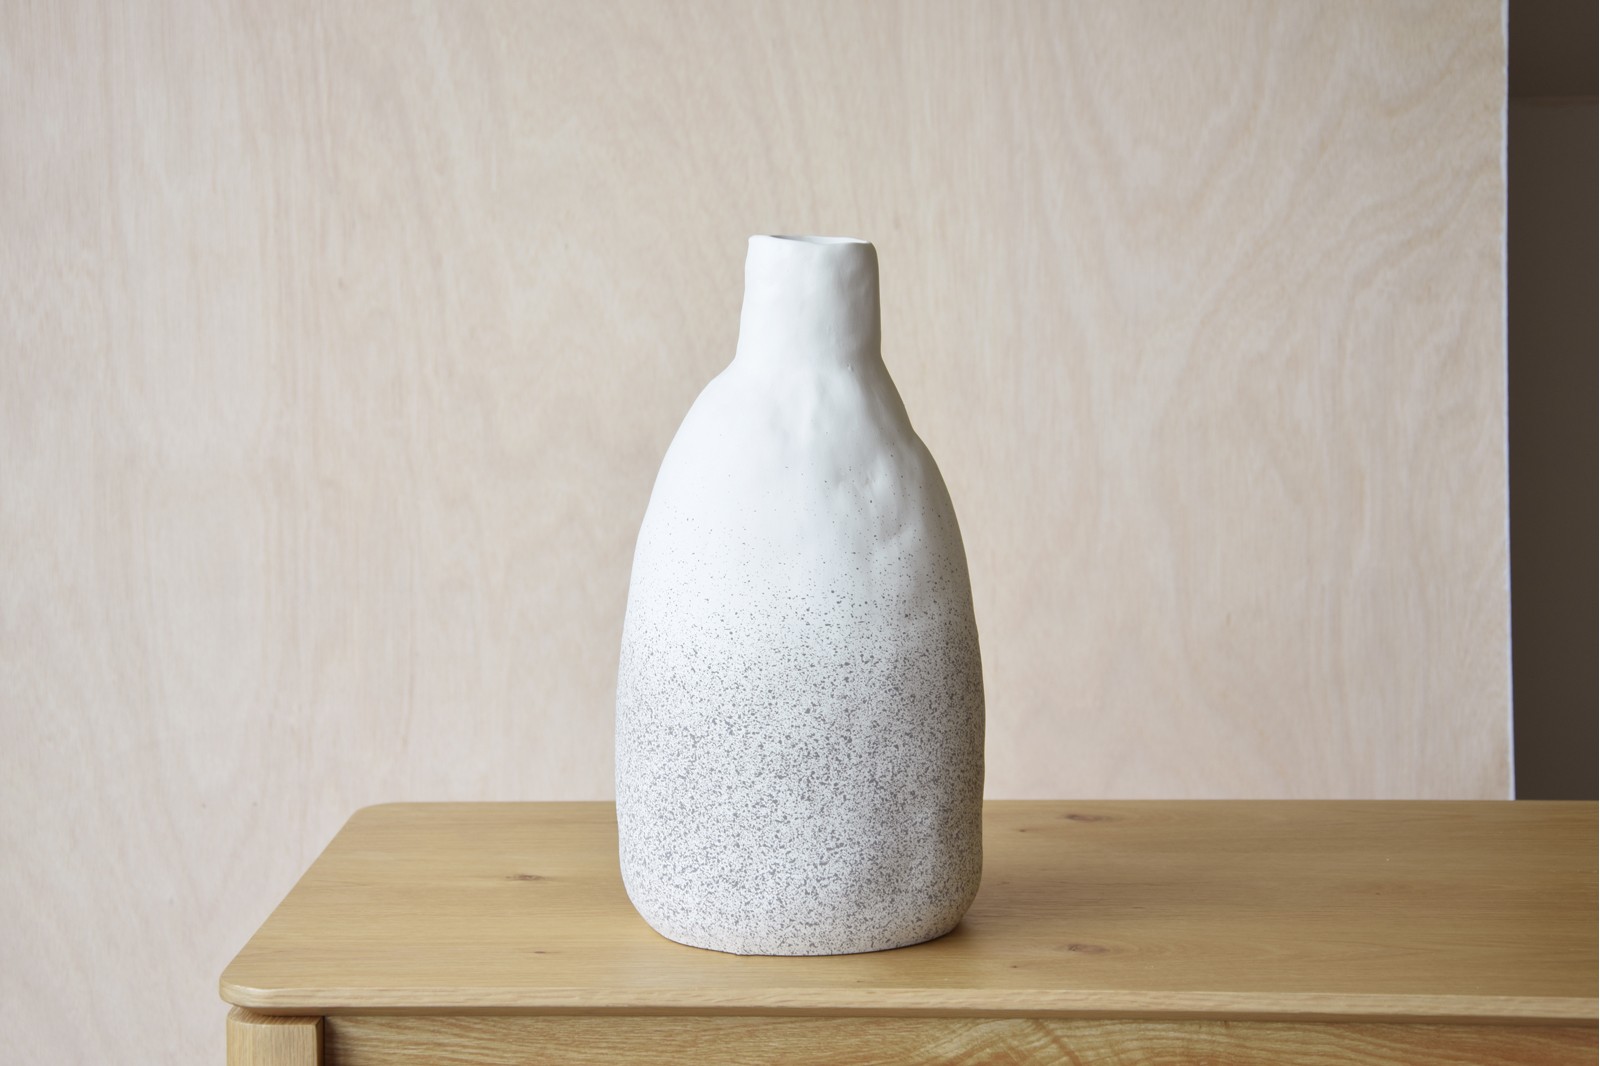 TOSCA COLLECTION: CERAMIC VASES AND CENTERPIECE